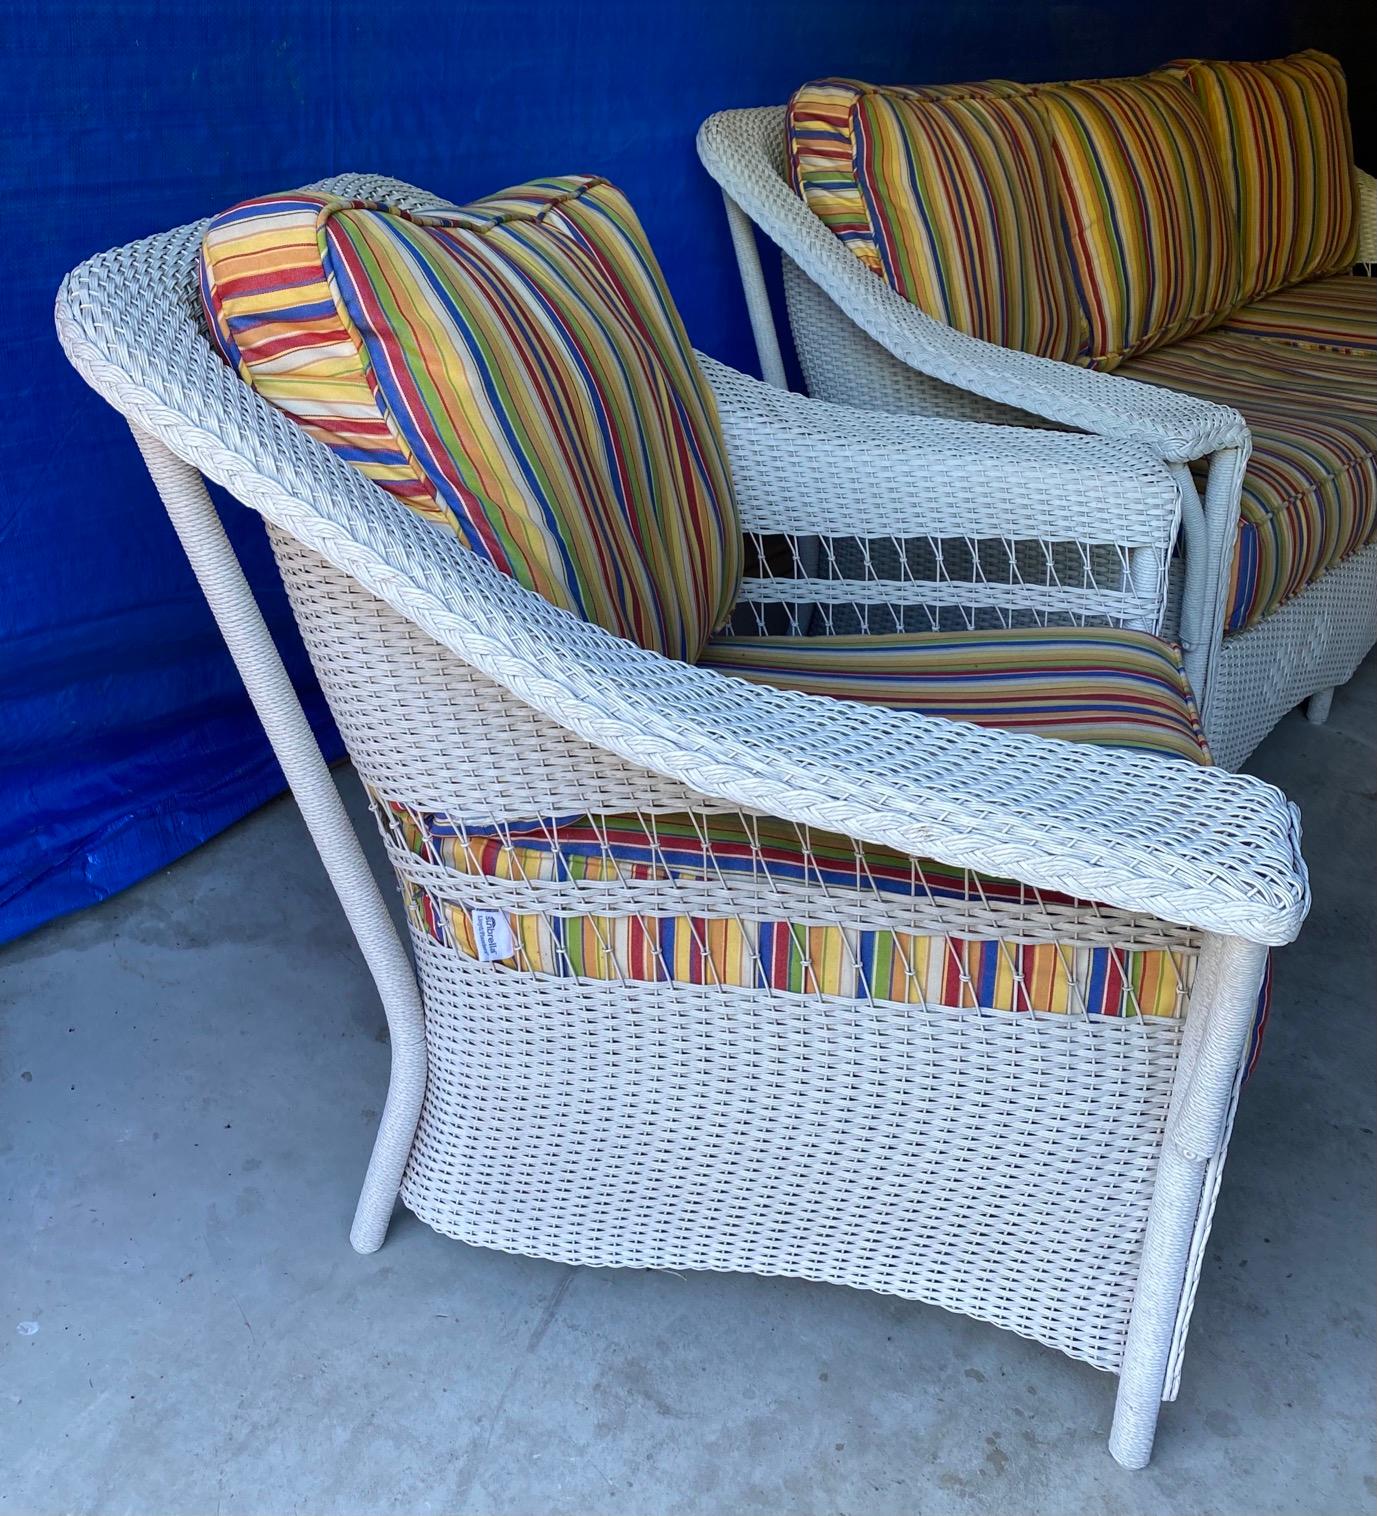 4 Piece Wicker Patio Seating Ensemble For Sale 3